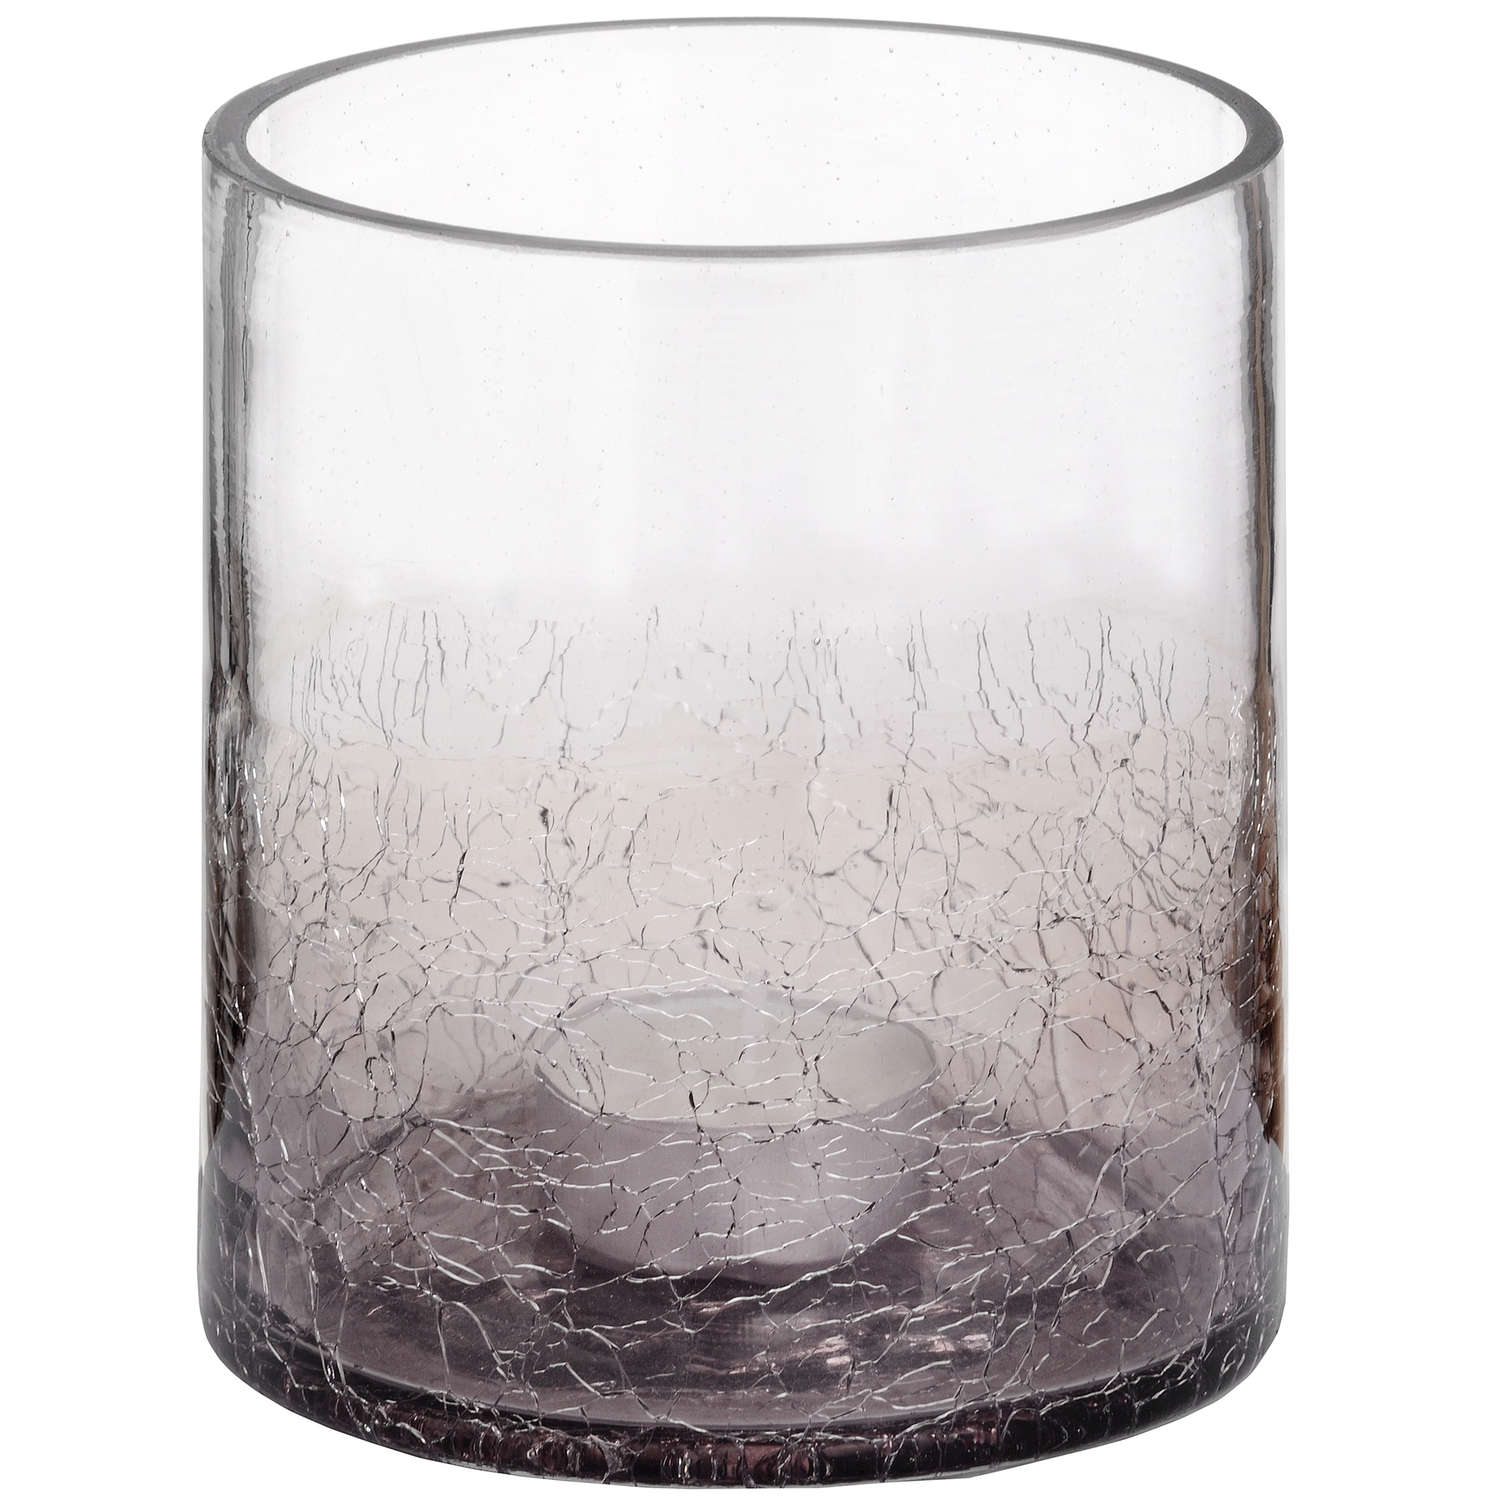 Victoria & Co. Smokey Crackle Glass Candle Holder